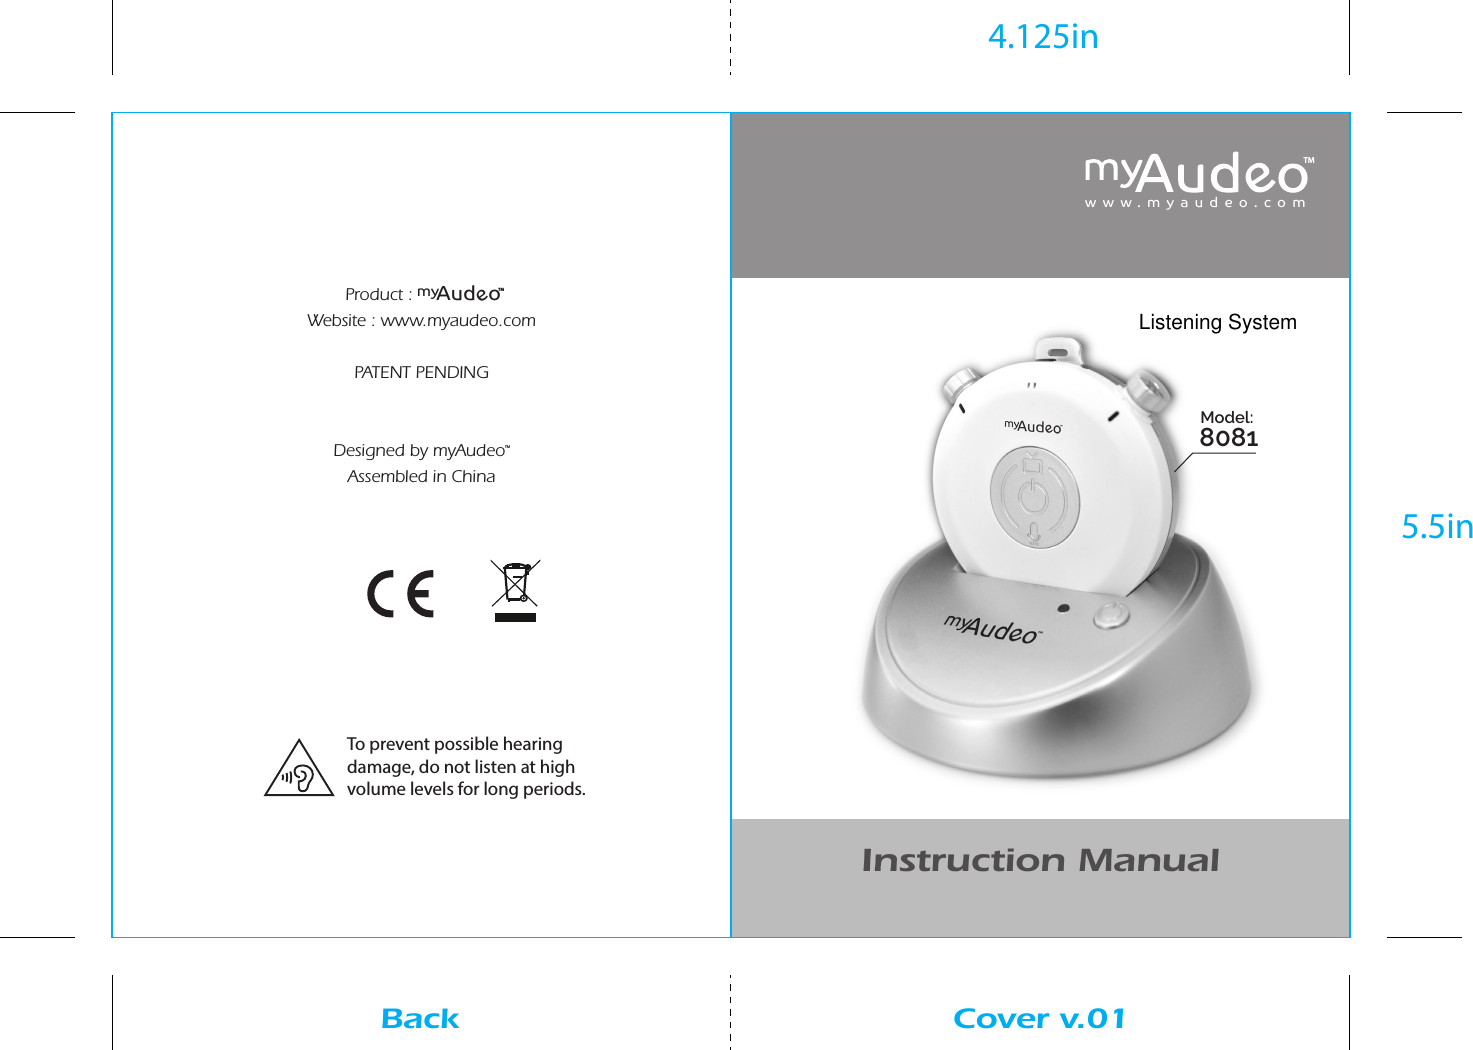 Product : Website : www.myaudeo.comPATENT PENDINGDesigned by myAudeoTMAssembled in ChinaInstruction Manualwww.myaudeo.comModel: 8081Cover v.01Back4.125in5.5inTMAudmyeoTMTo prevent possible hearing damage, do not listen at high volume levels for long periods.Listening System